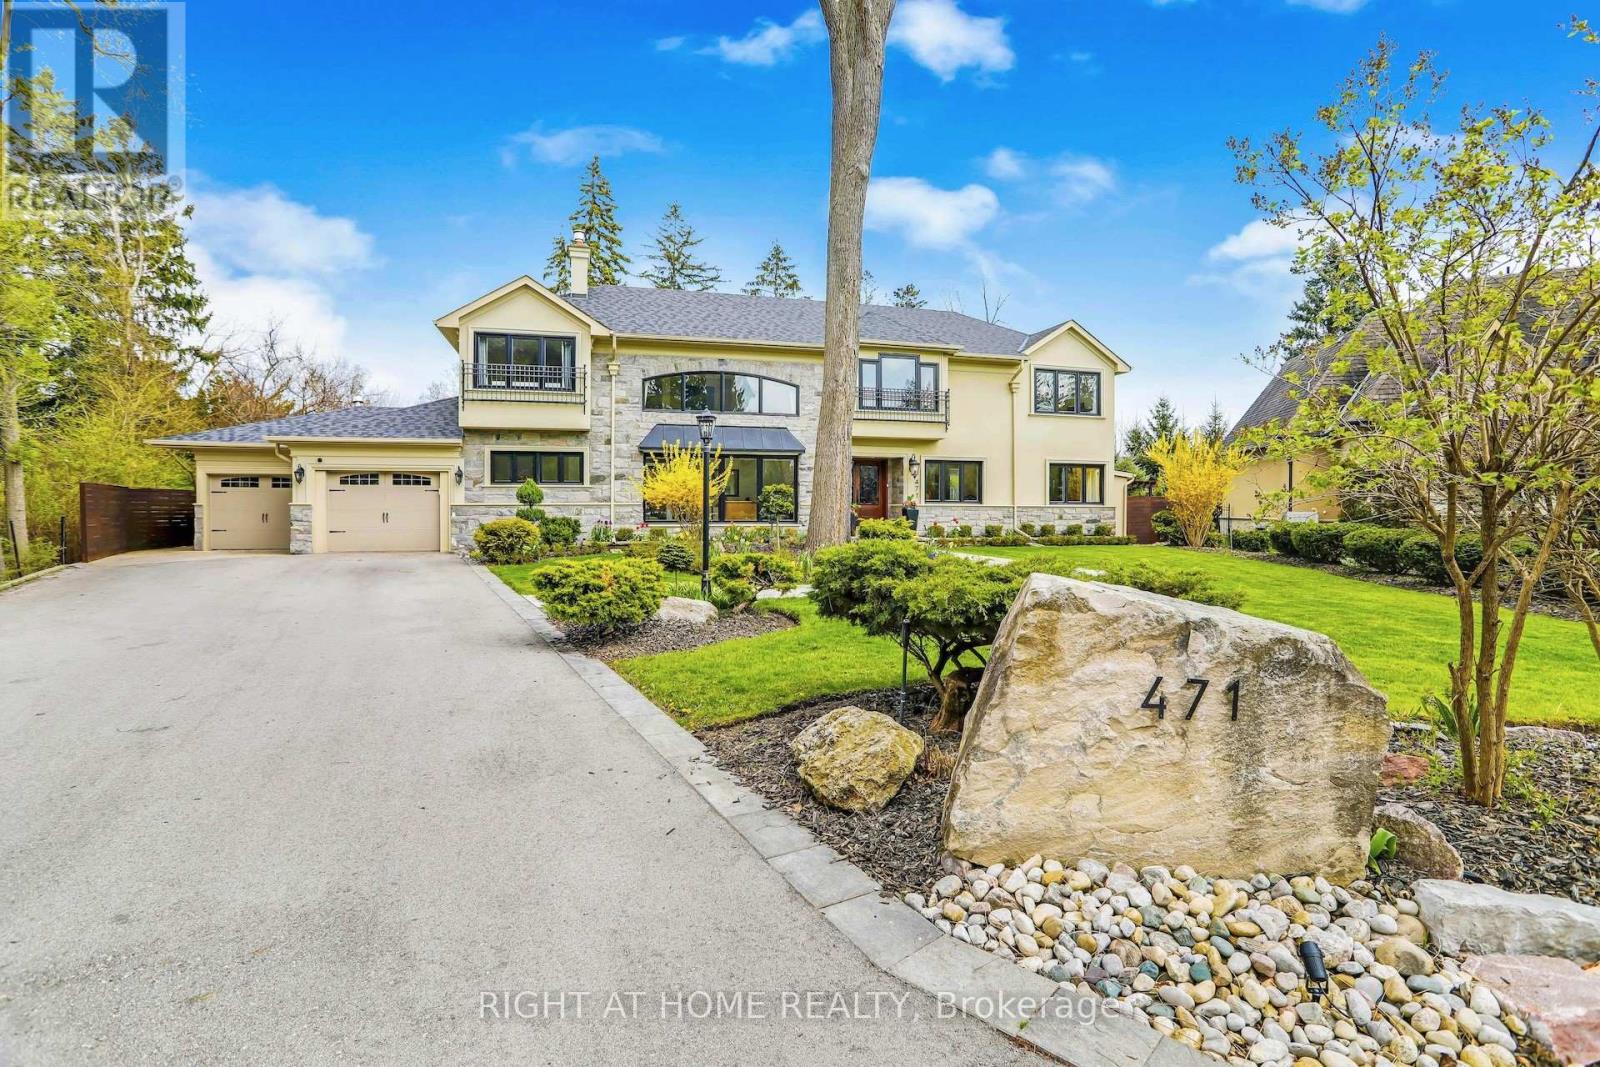 471 COUNTRY CLUB CRES, mississauga, Ontario